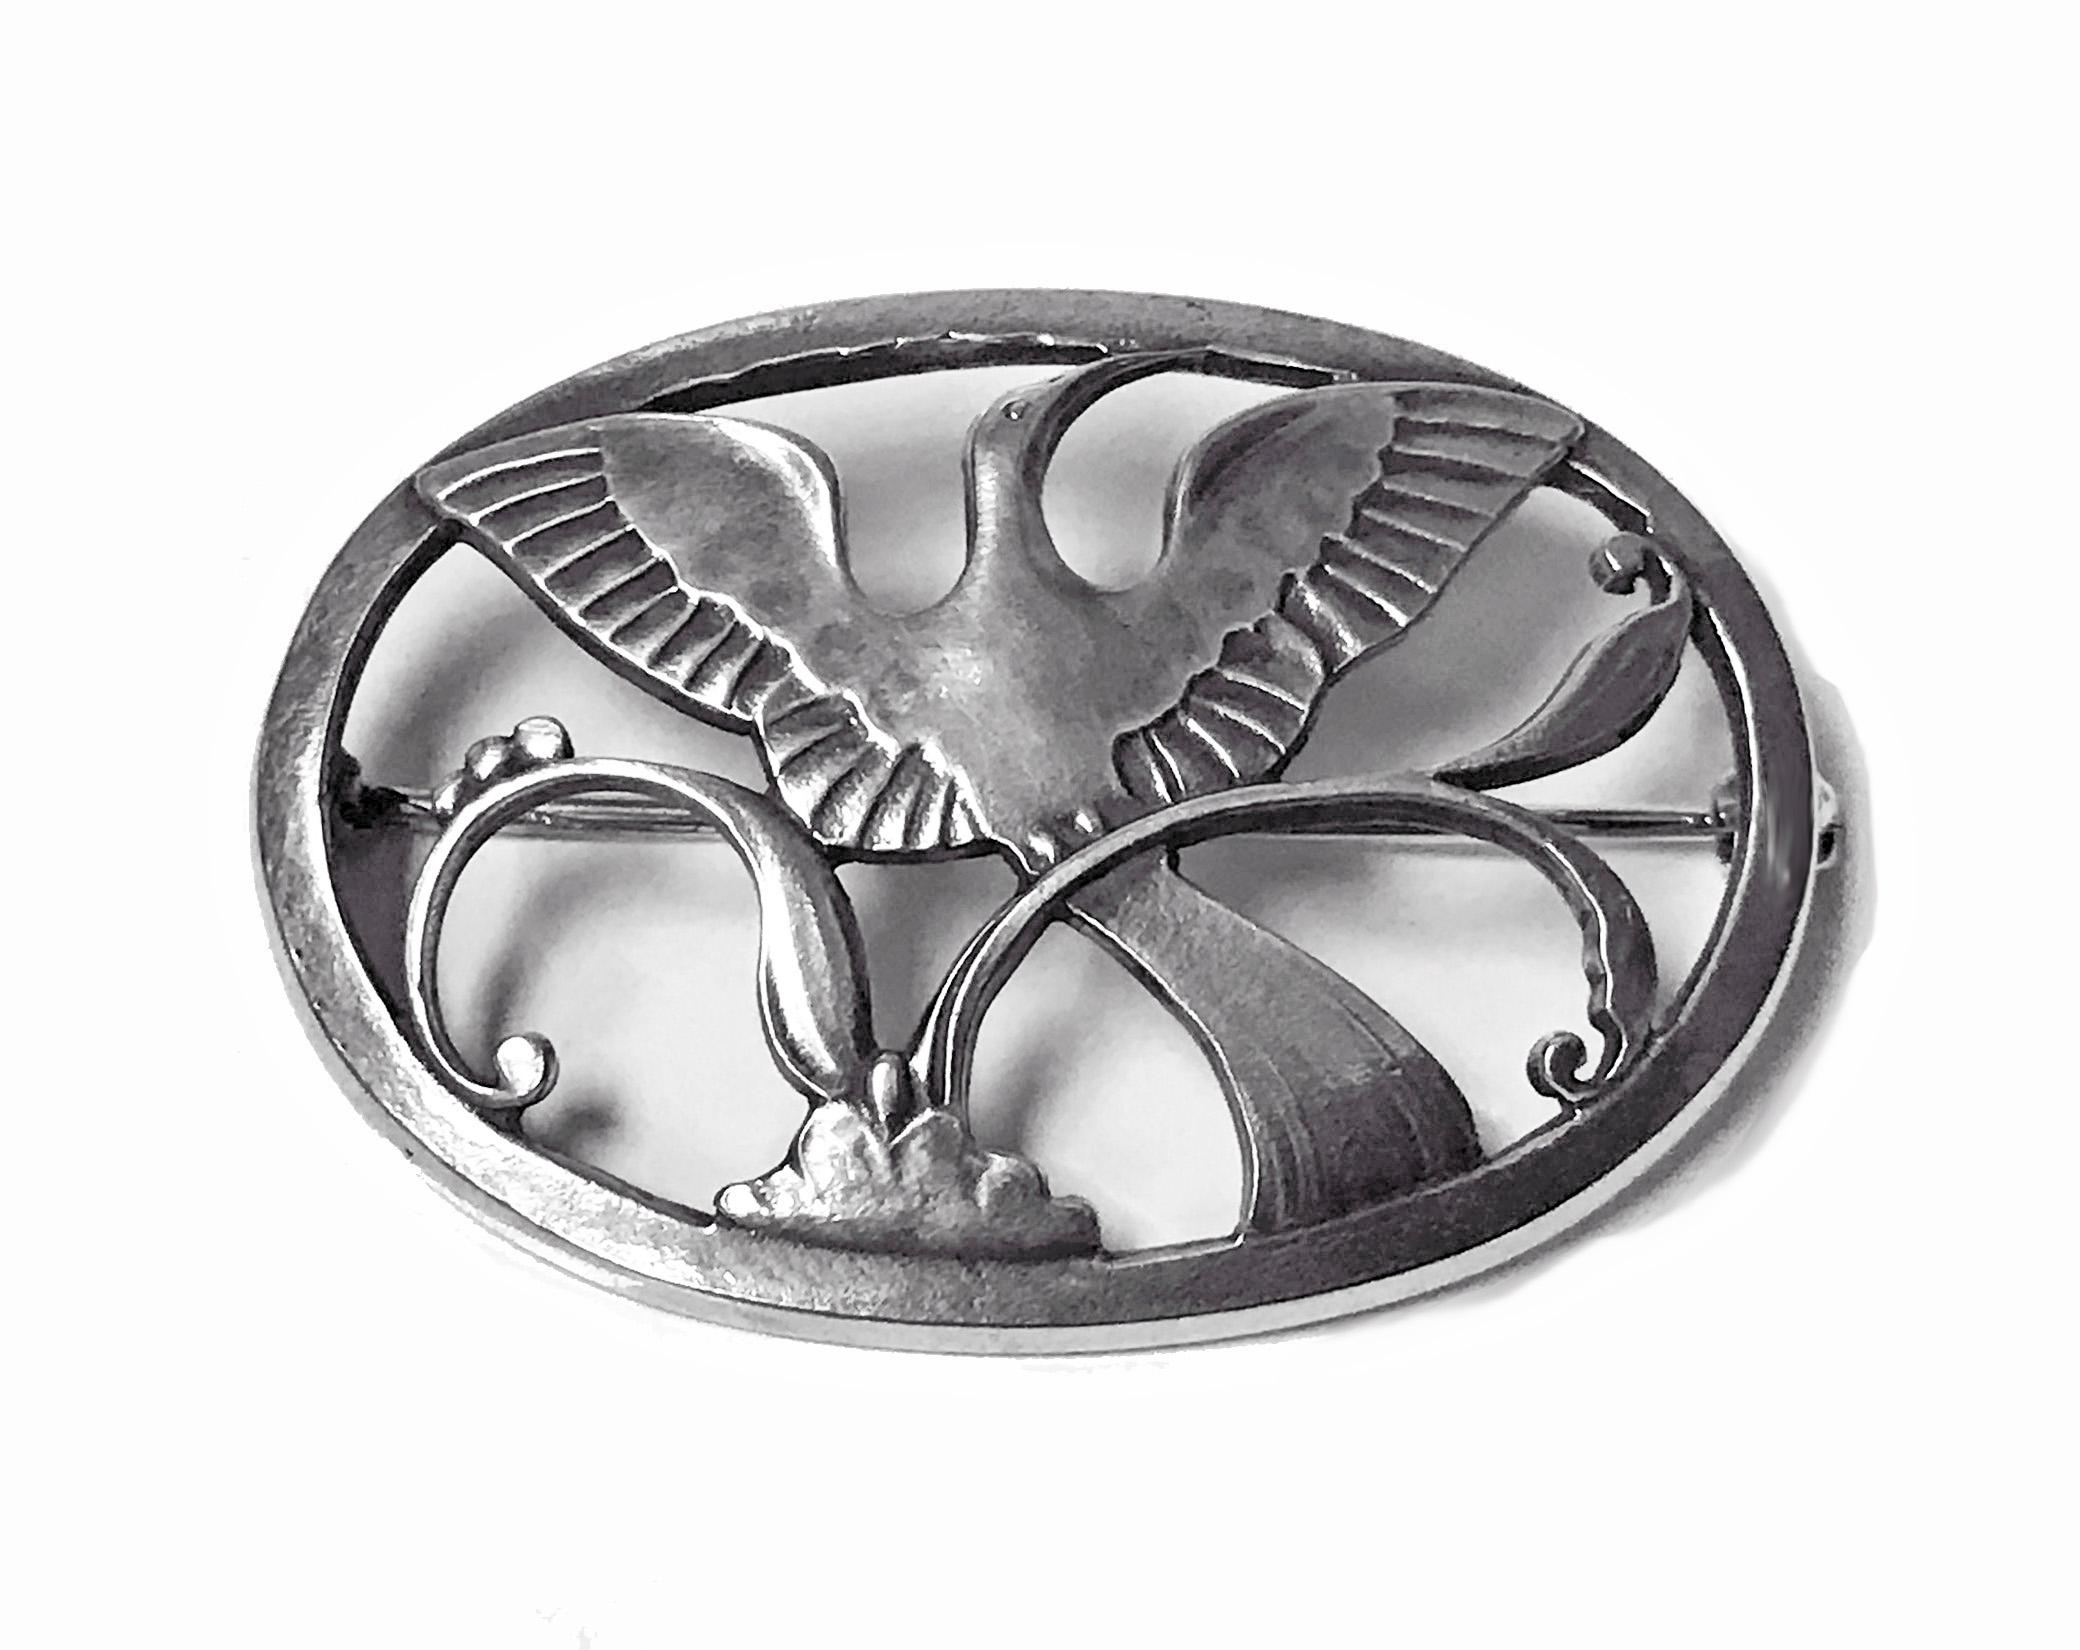 Georg Jensen Sterling Silver Paradise Bird Brooch. Fully hallmarked Georg Jensen oval dotted punch, 925 Sterling Denmark and design number 238. Designed by Arno Malinowski for Georg Jensen. Measures: 4.25 x 3.00 cm.  Weight 10.20 gm.